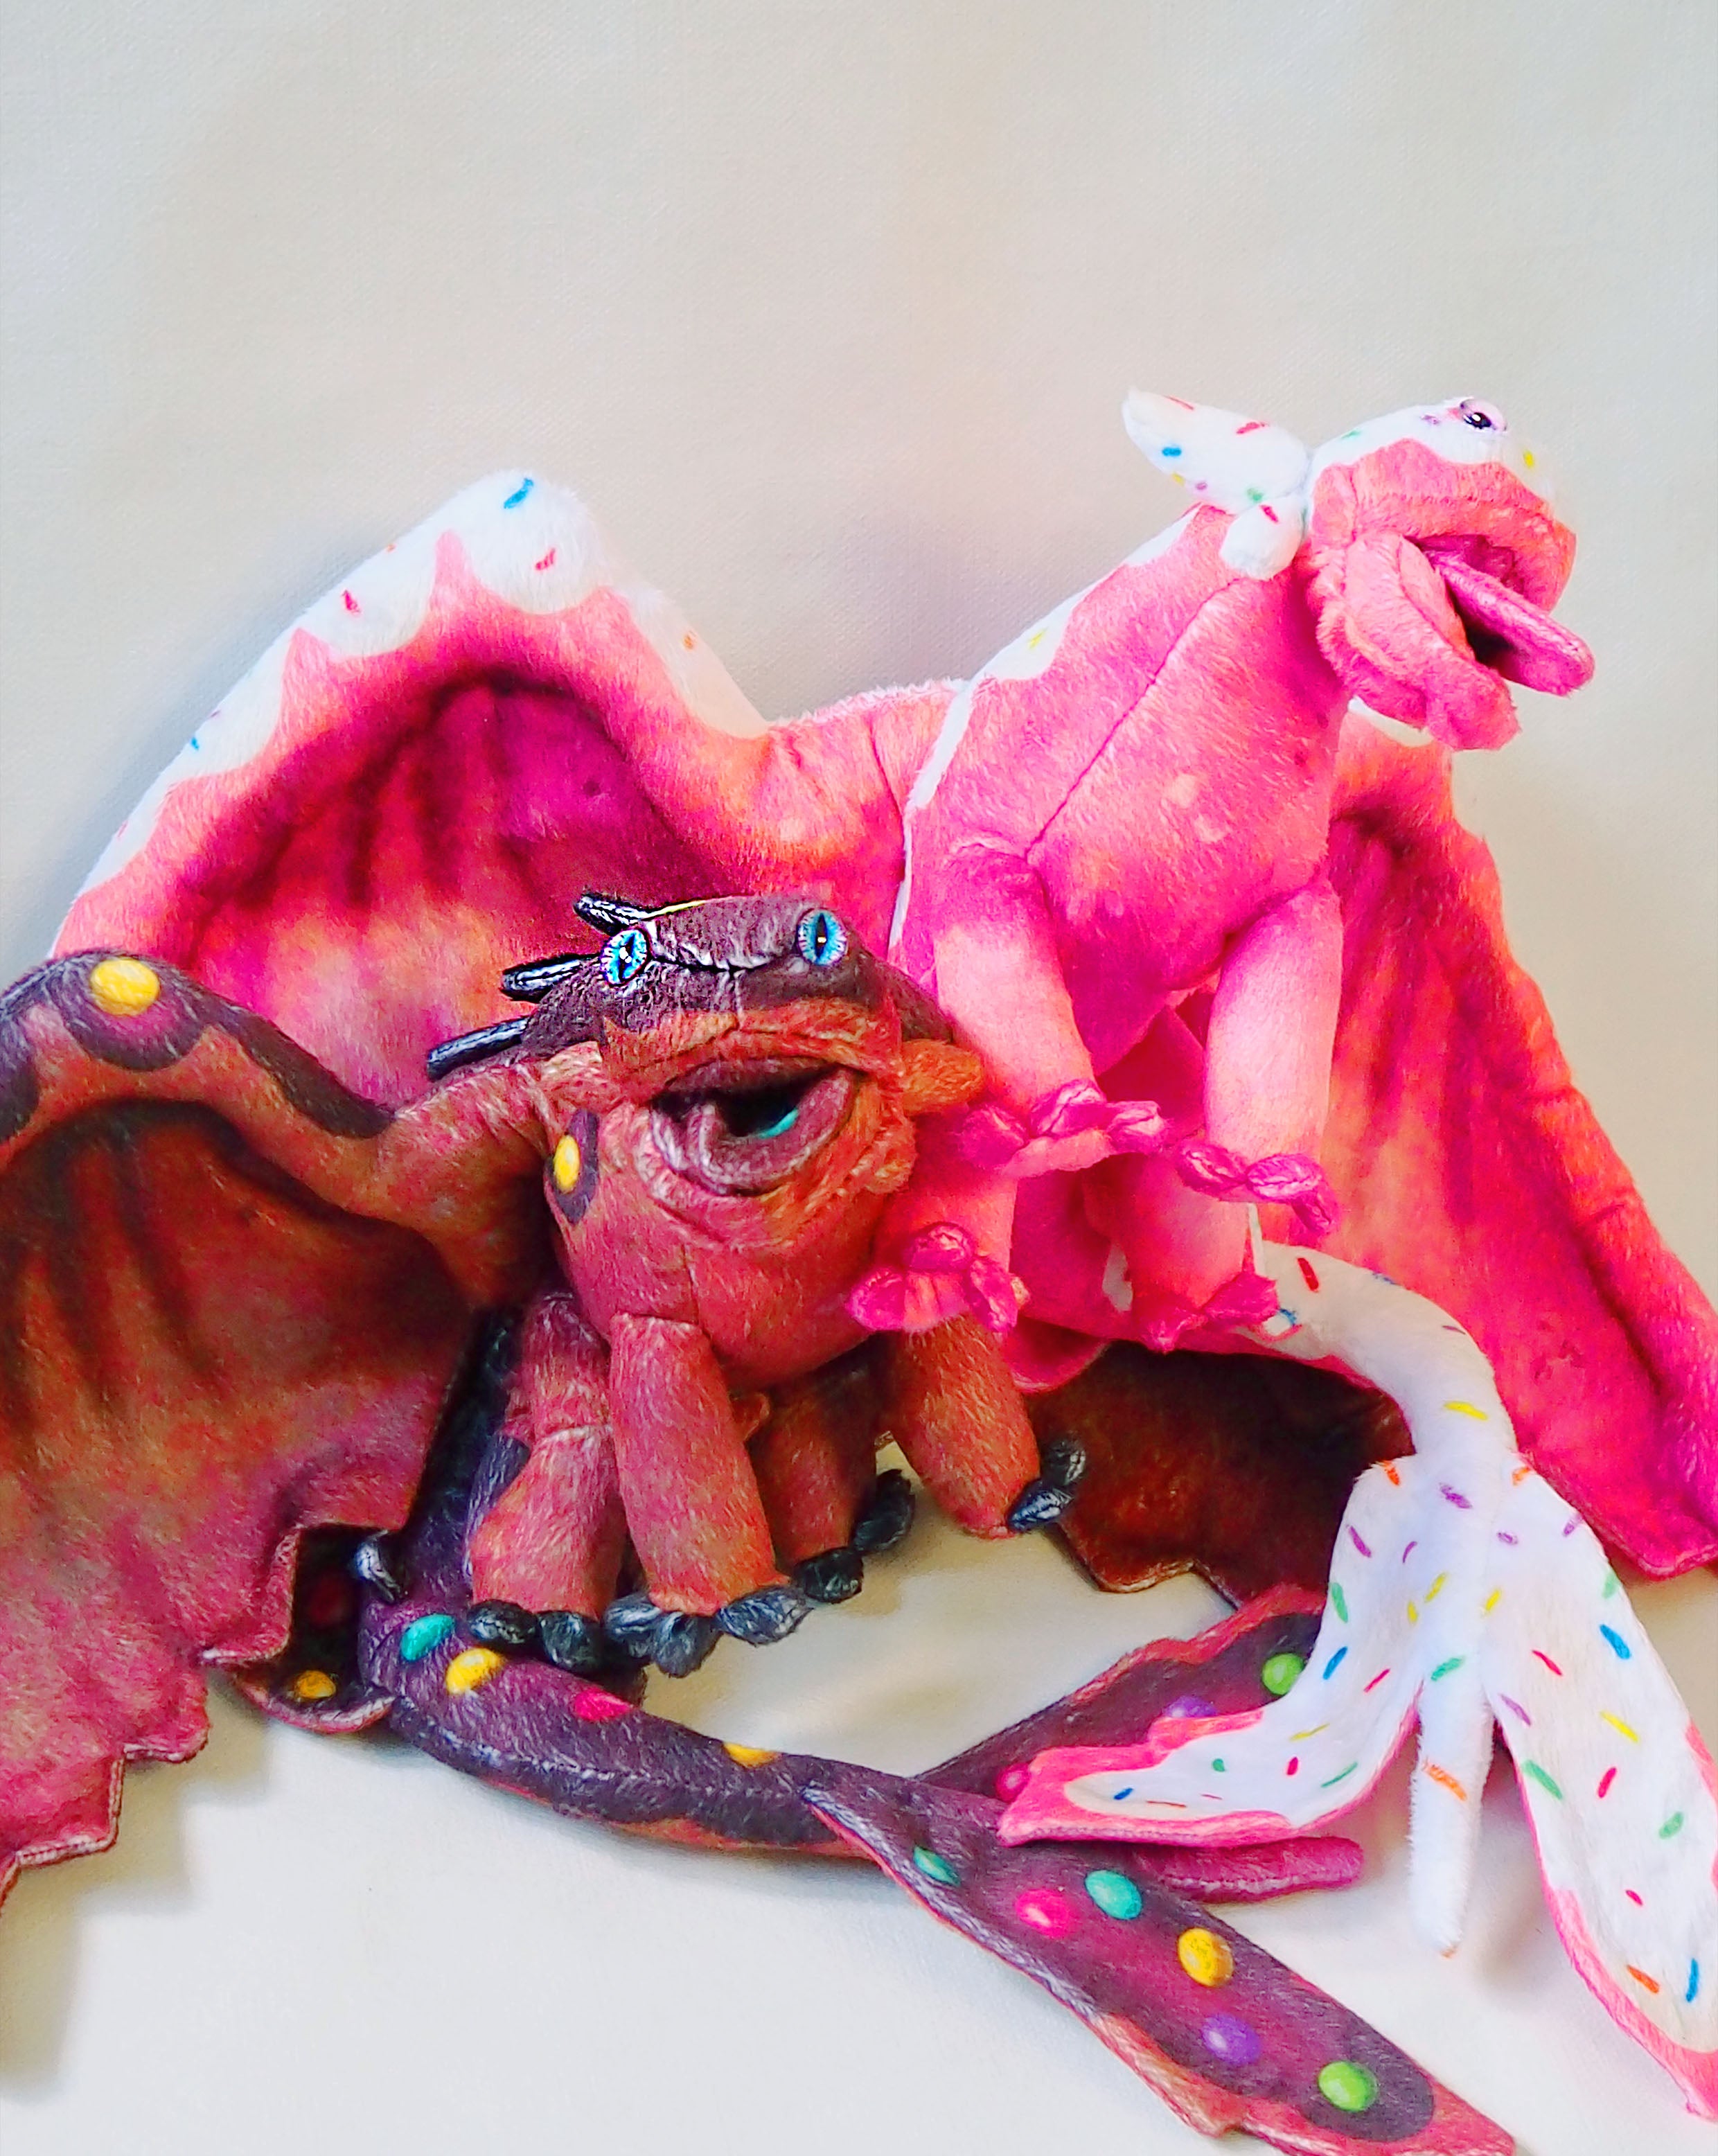 Colorful dragons with funny emotions - 7 Edition